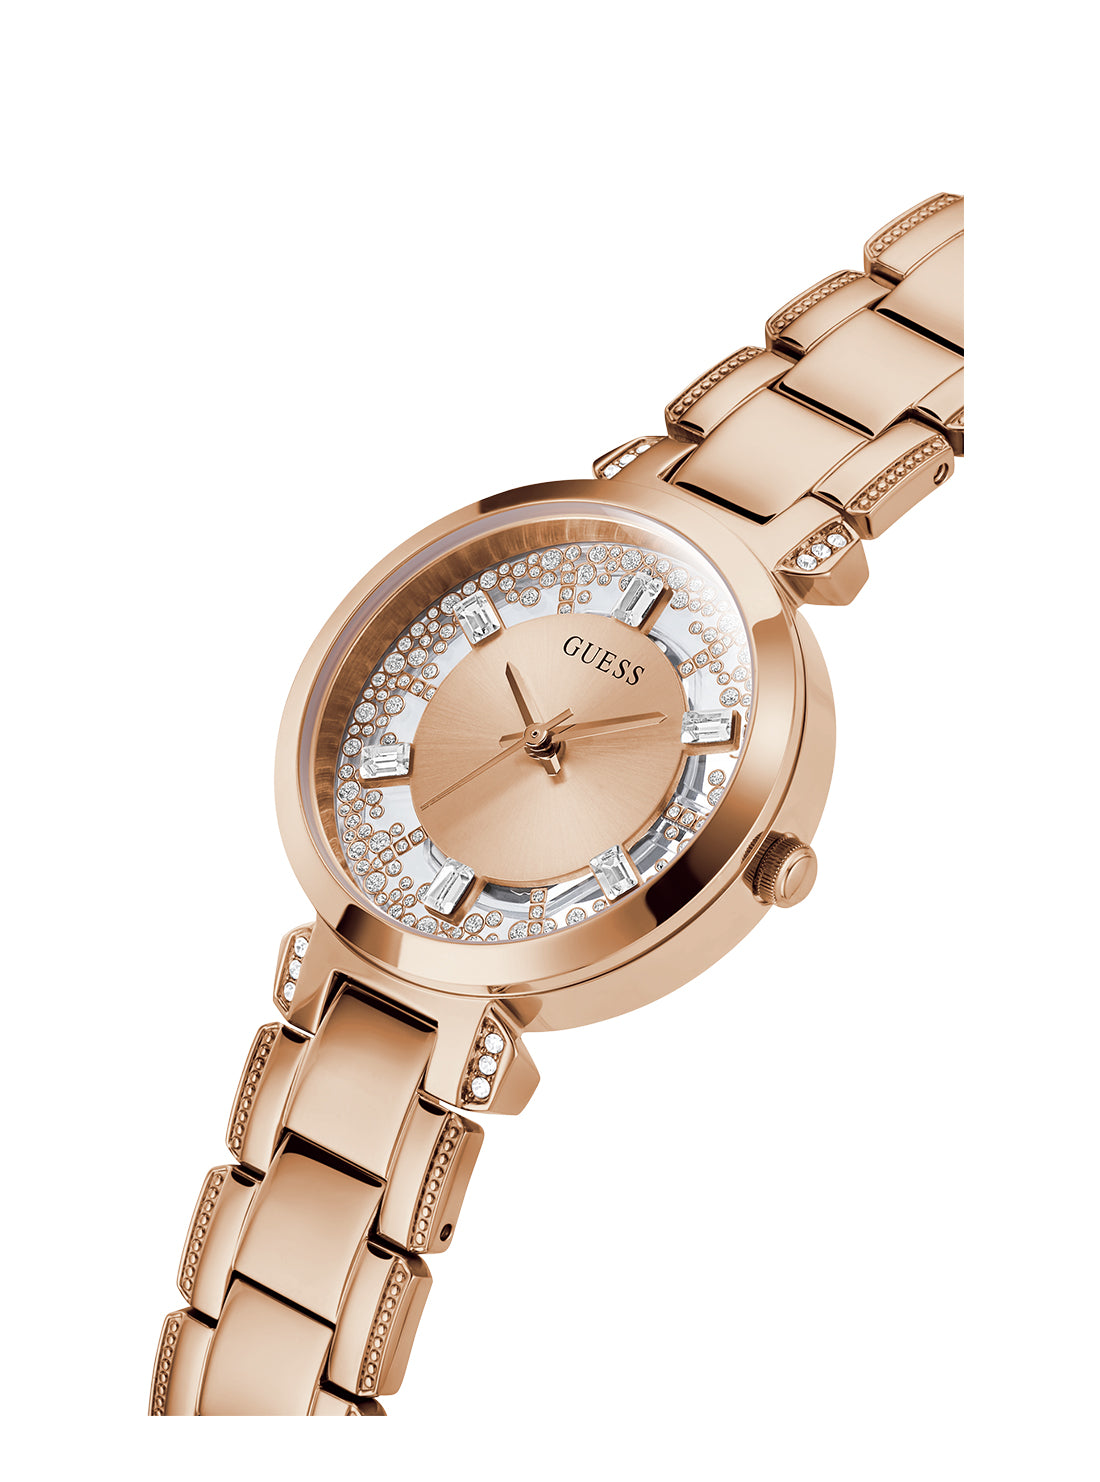 GUESS Women's Rose Gold Crystal Clear Glitz Watch GW0470L3 Angle View